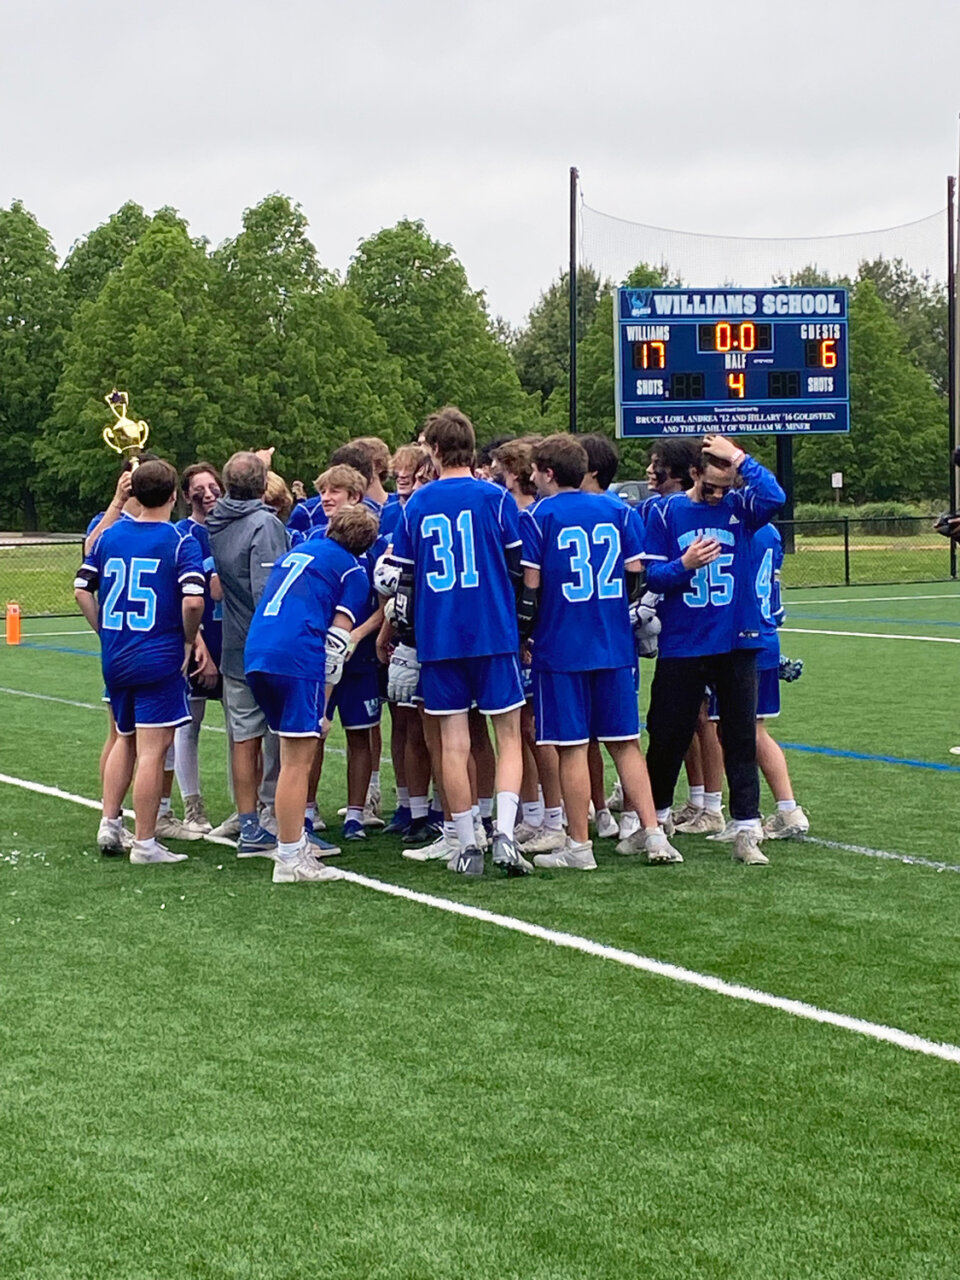 Williams School boys lacrosse team celebrates win in huddle with trophy